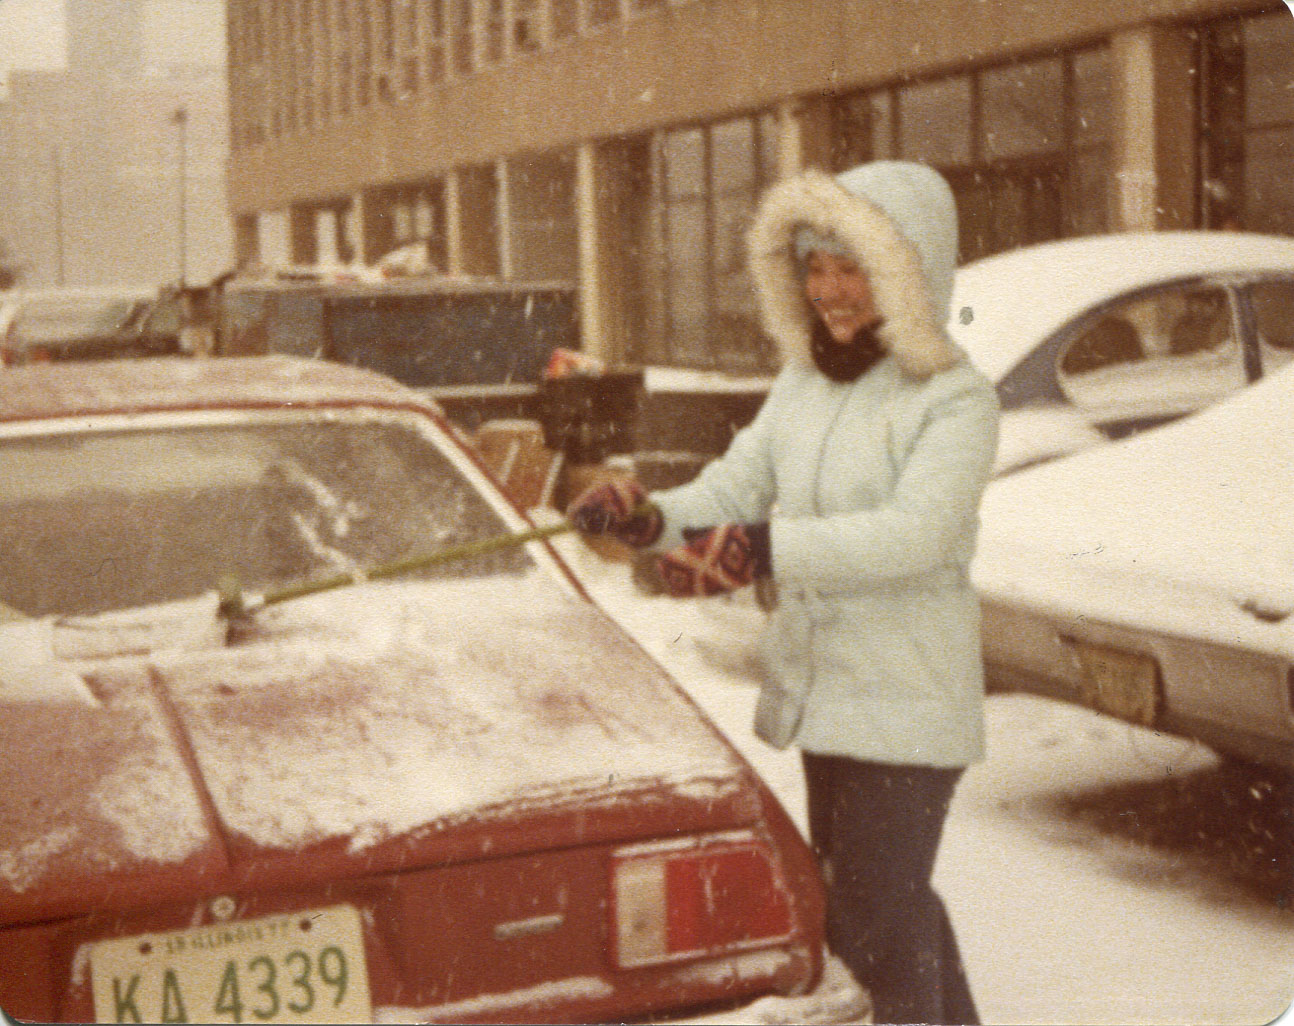 Photo of Etta McKenna, 1977.Taken in Jan 1978 in the parking lot of 1926 W Harrison. First snow in Chicago winter ‘78,Taken by “my friend, Agnes Clement, while cleaning her car.”Pictured: “myself cleaning the car” [One woman in cleaning snow off a car]Notes from Sarah Carlson, in discussion with McKenna: “This reminds me of my first snow in Chicago. I was wearing a parka bought from Woolworth’s on sale. It was a thin parka so one of the first experiences in the cold. Not since I came to Chicago had I felt how cold is‘cold’! Cleaning my friend’s car, a Chevy Monza. Any views, findings, conclusions, or recommendations expressed in this story do not necessarily represent those of the National Endowment for the Humanities. (c) Field Museum of Natural History - CC BY-NC 4.0